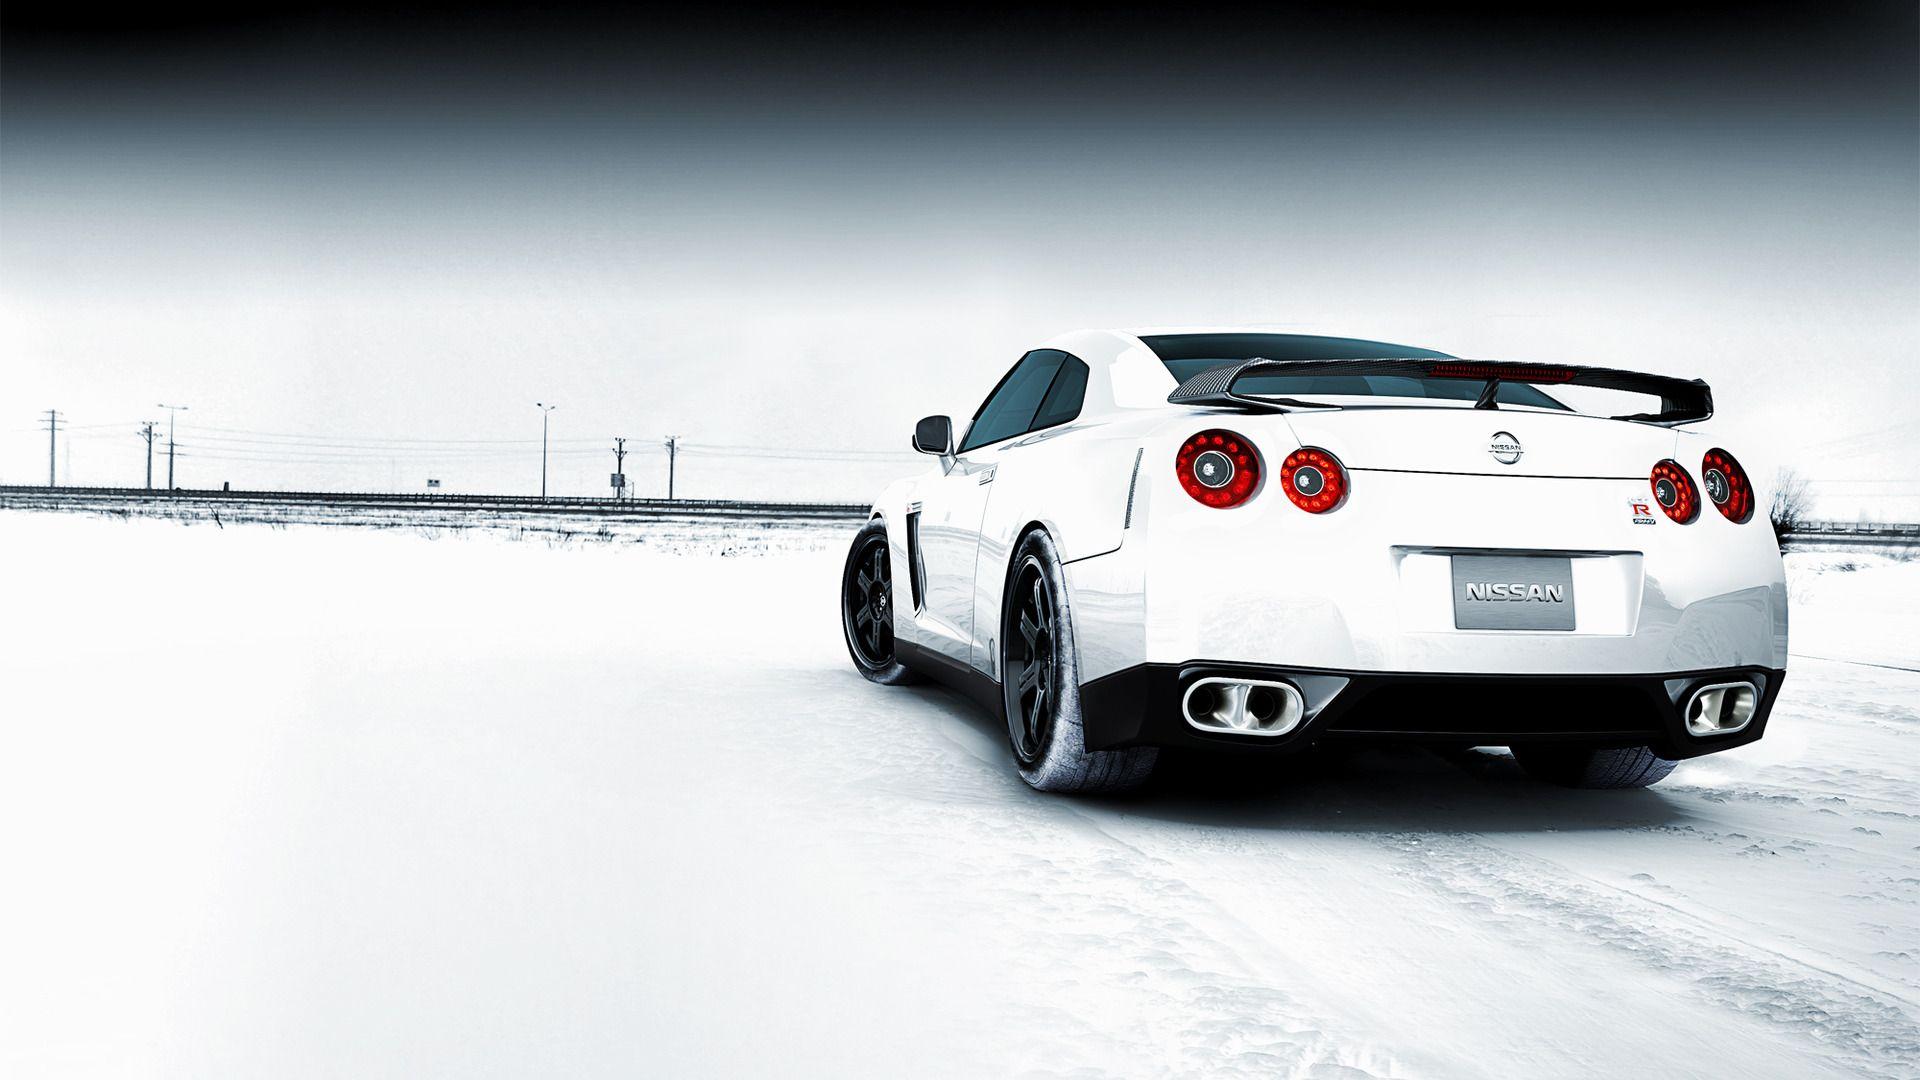 Awesome Full HD Car Wallpaper 1920x1080 Pics Widescreen Cars Page